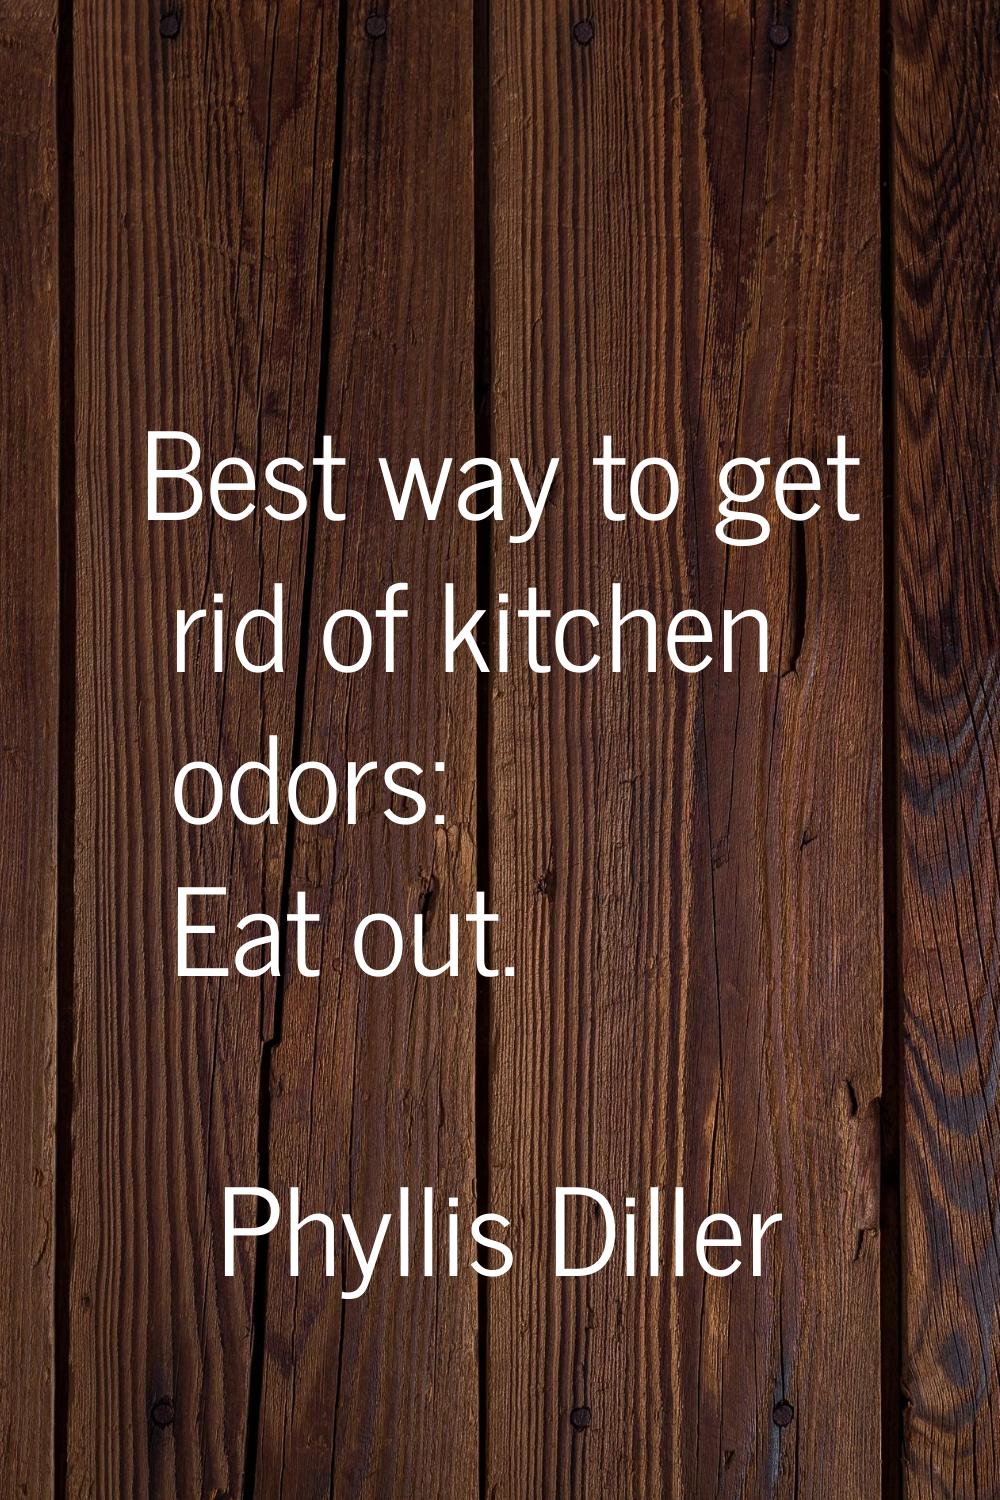 Best way to get rid of kitchen odors: Eat out.